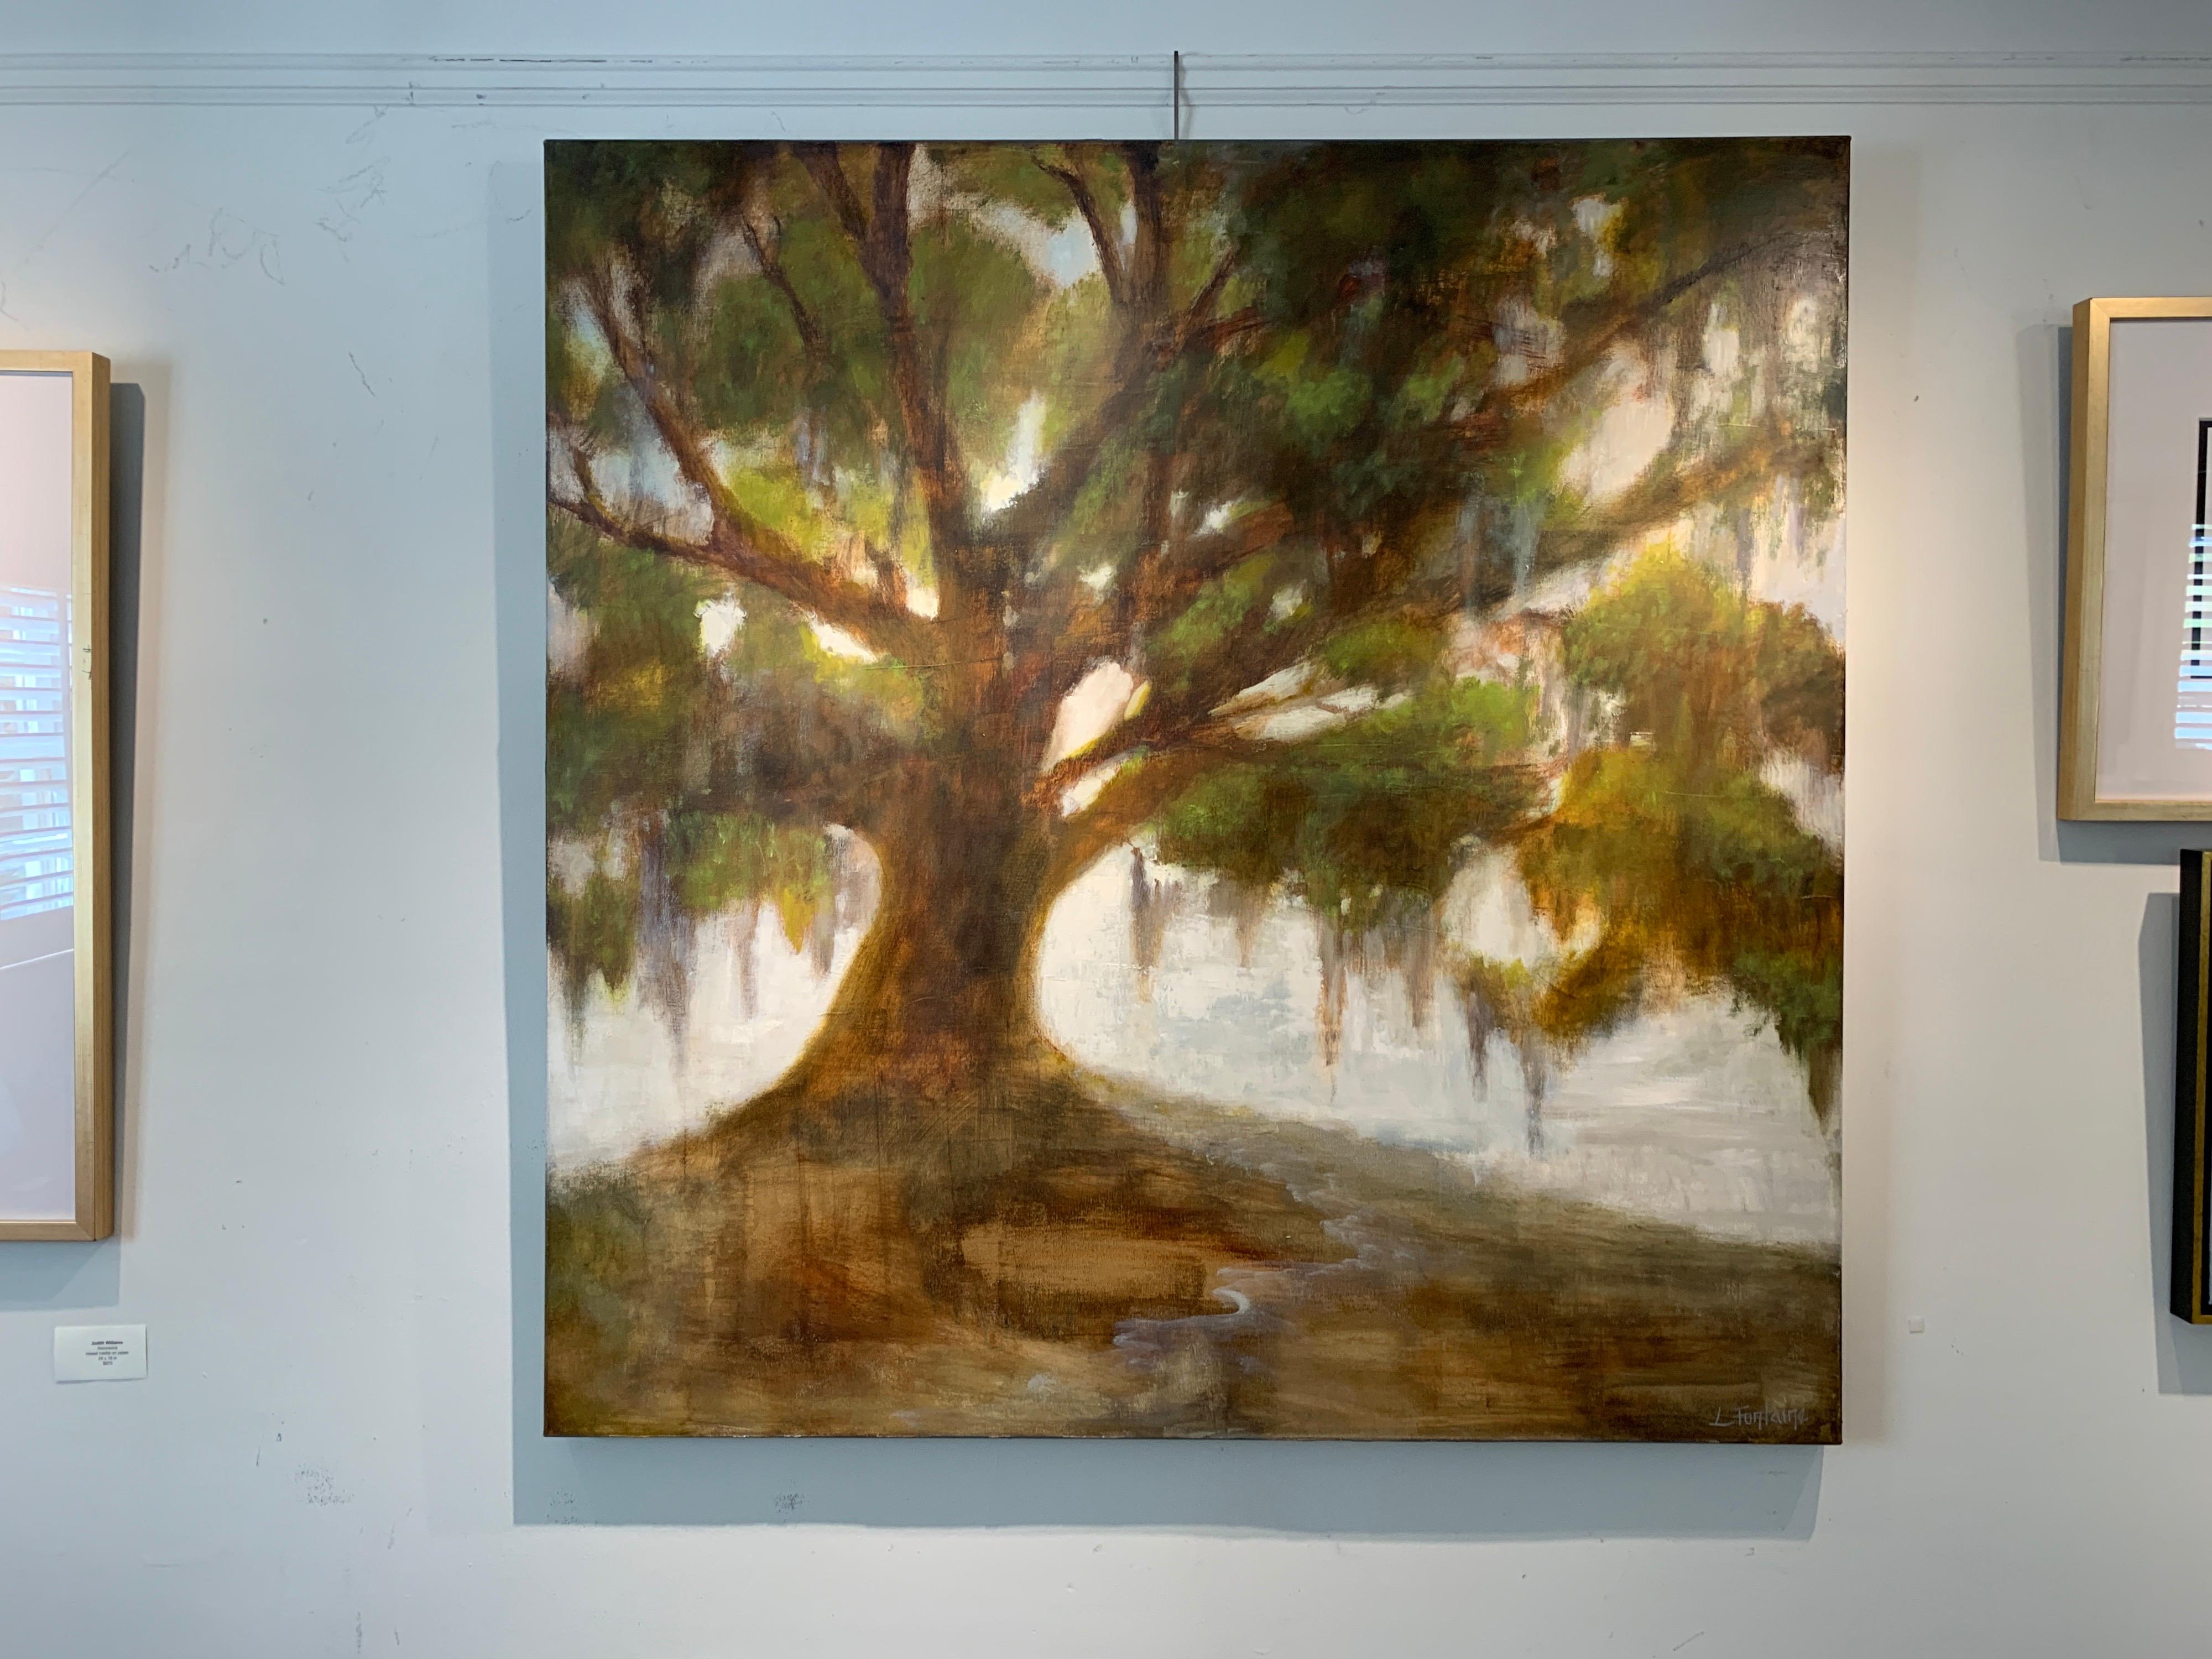 Laura Lloyd Fontaine's studio looks over the Lowcountry marsh of Charleston, S.C. When the tide is high, she paddles through the narrow creeks and marsh grass and into the Charleston Harbor. It is from this vantage point, close to the water in her